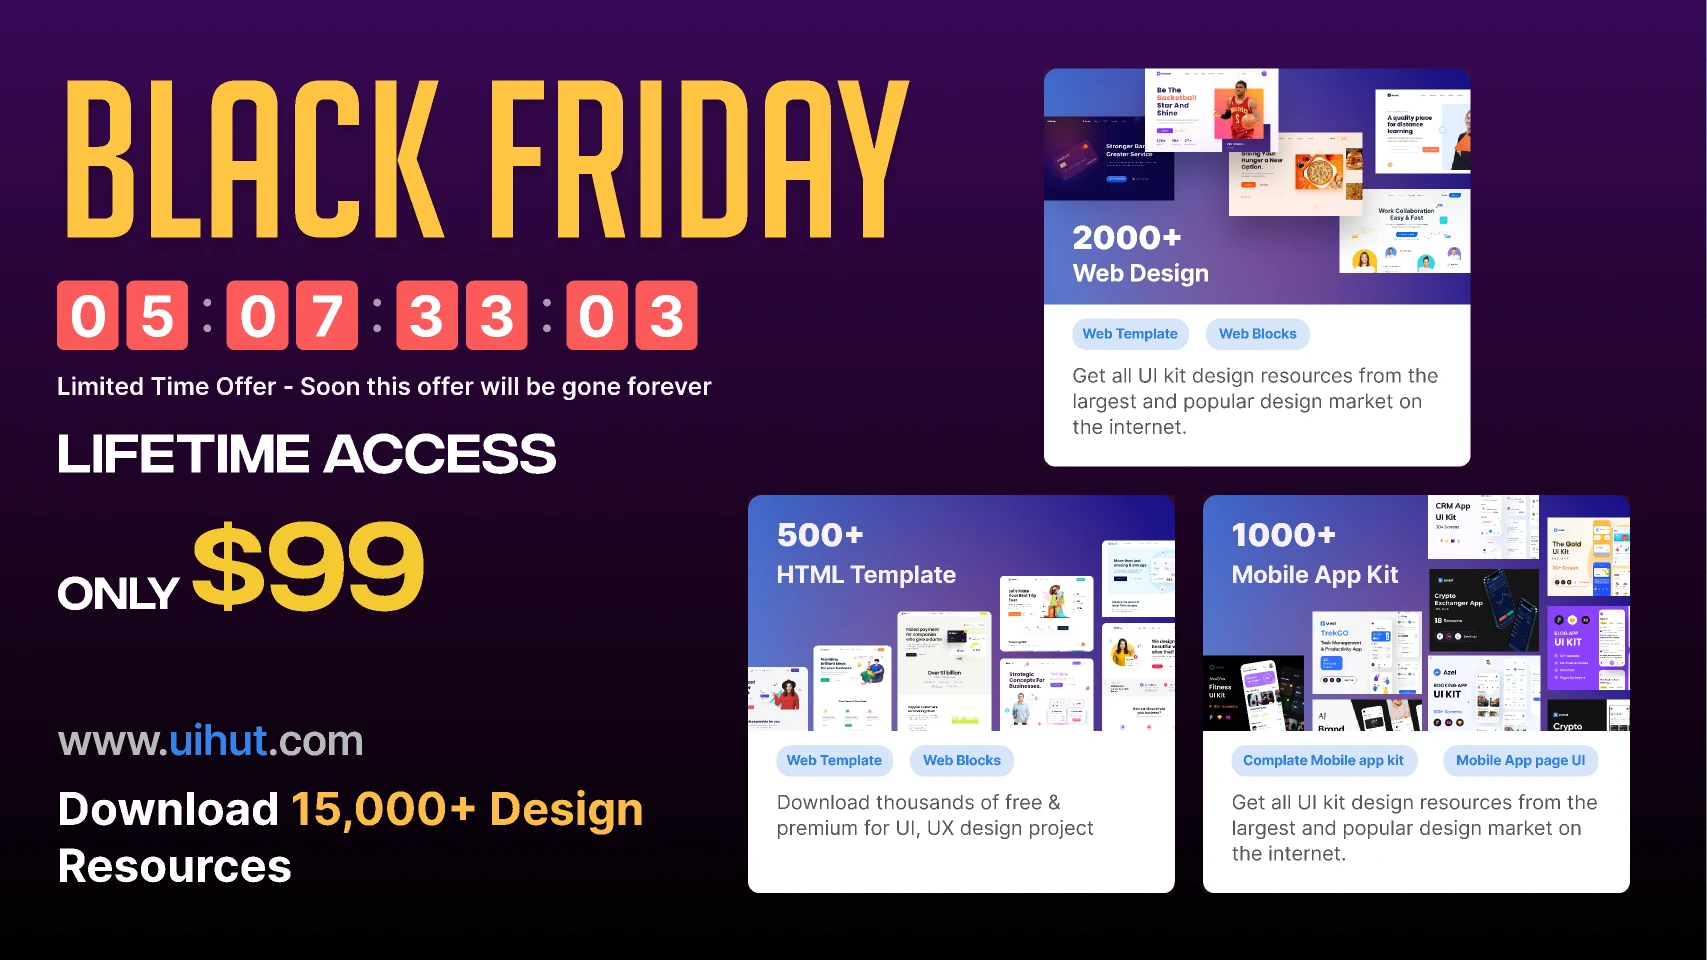 BLACK Friday Offer for Figma and Adobe XD